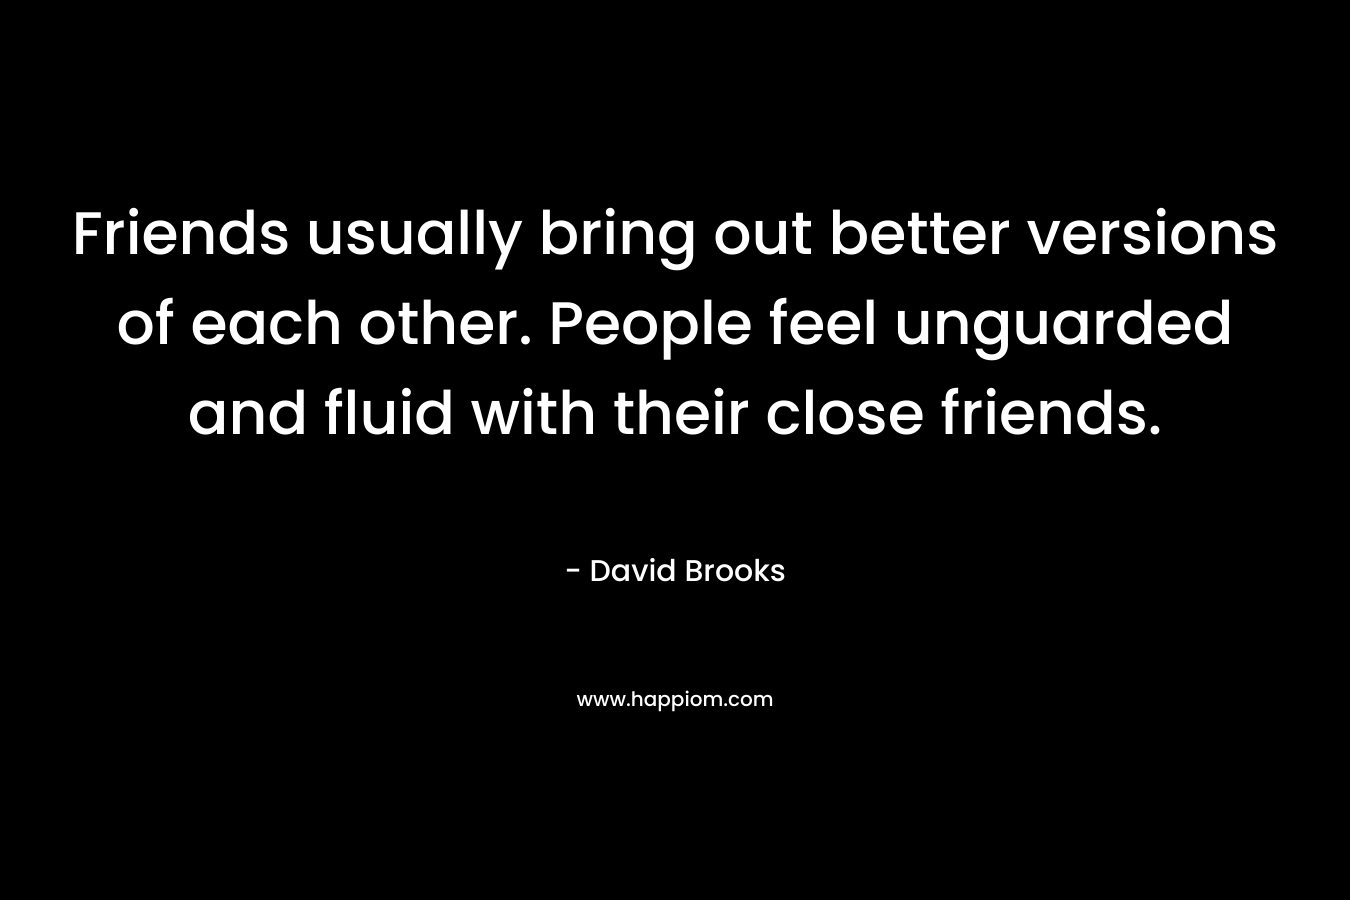 Friends usually bring out better versions of each other. People feel unguarded and fluid with their close friends. – David Brooks